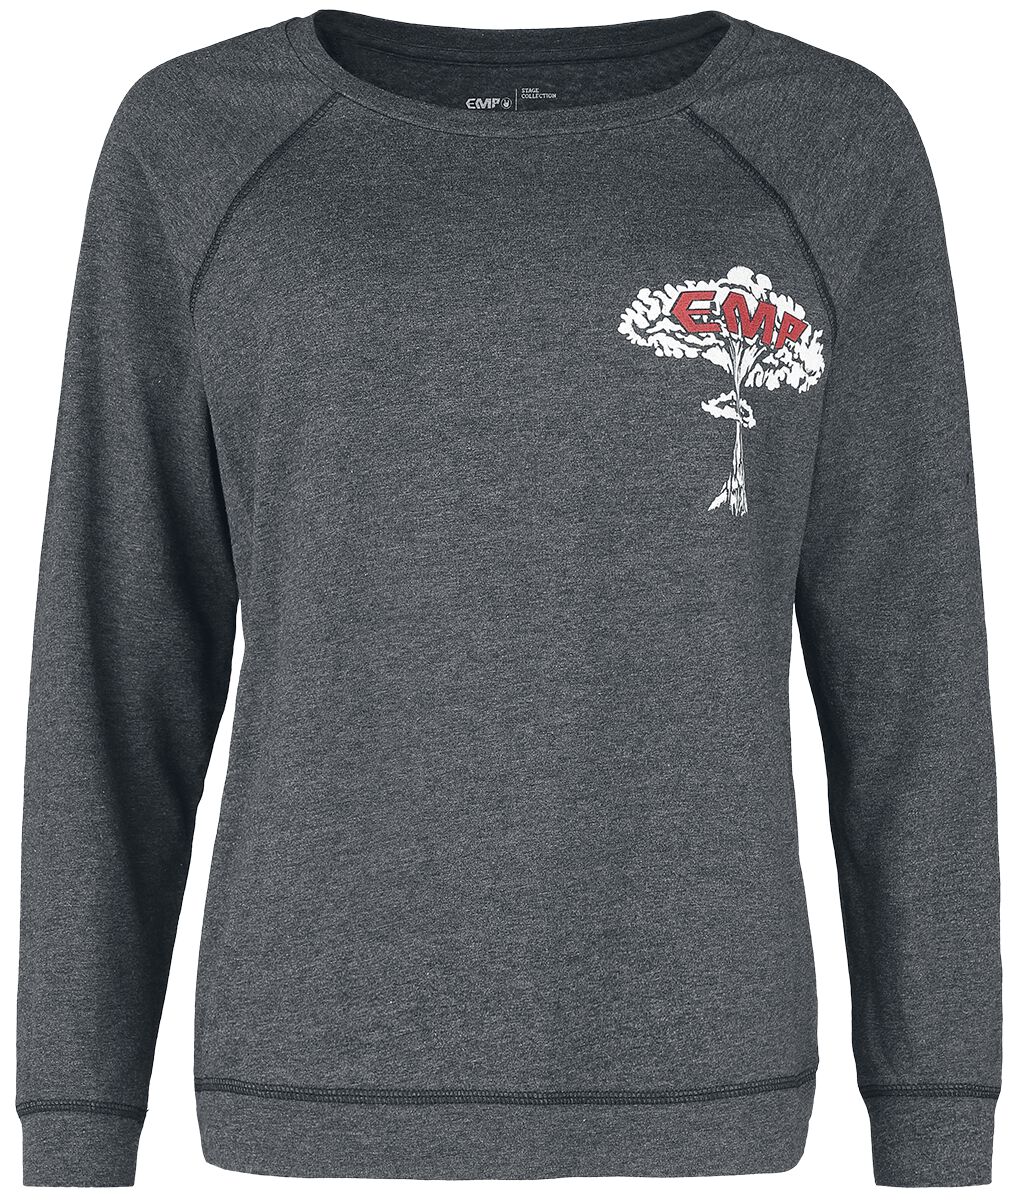 Image of Maglia Maniche Lunghe di EMP Stage Collection Long-sleeved EMP shirt - XS a XXL - Donna - grigio